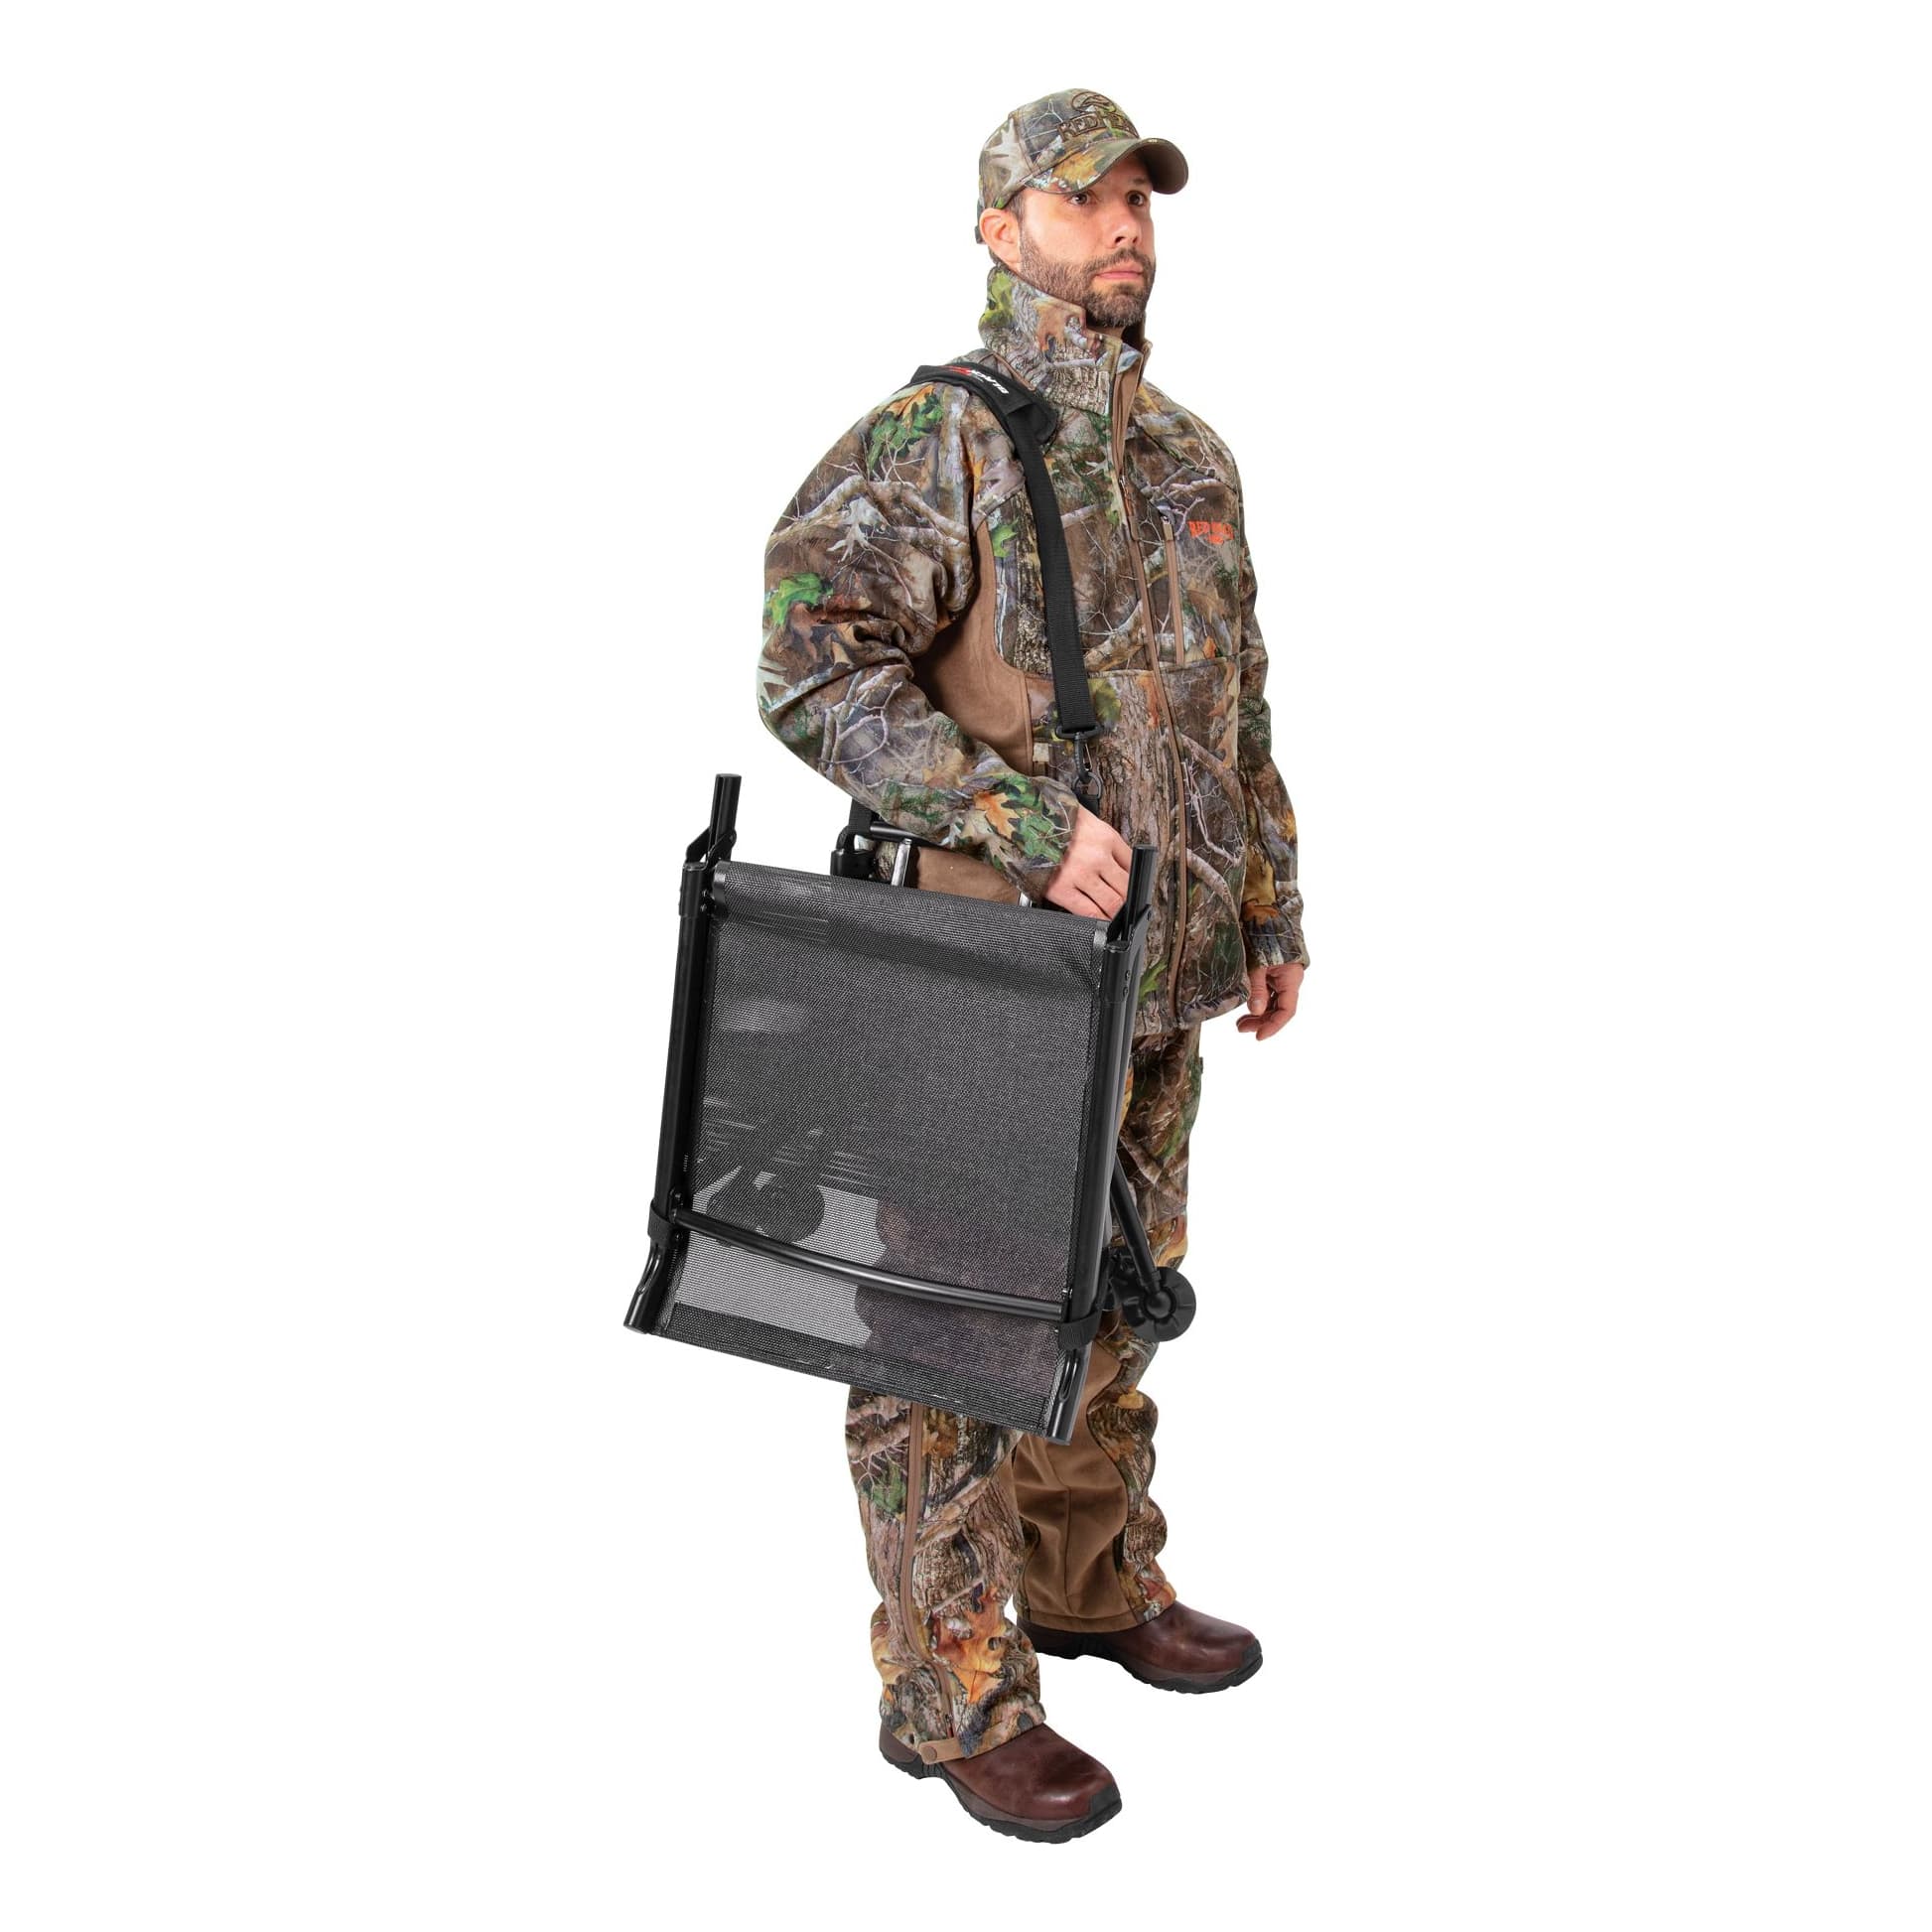 Cabela's BlackOut Comfort Max 360 Original Blind Chair - In the Field